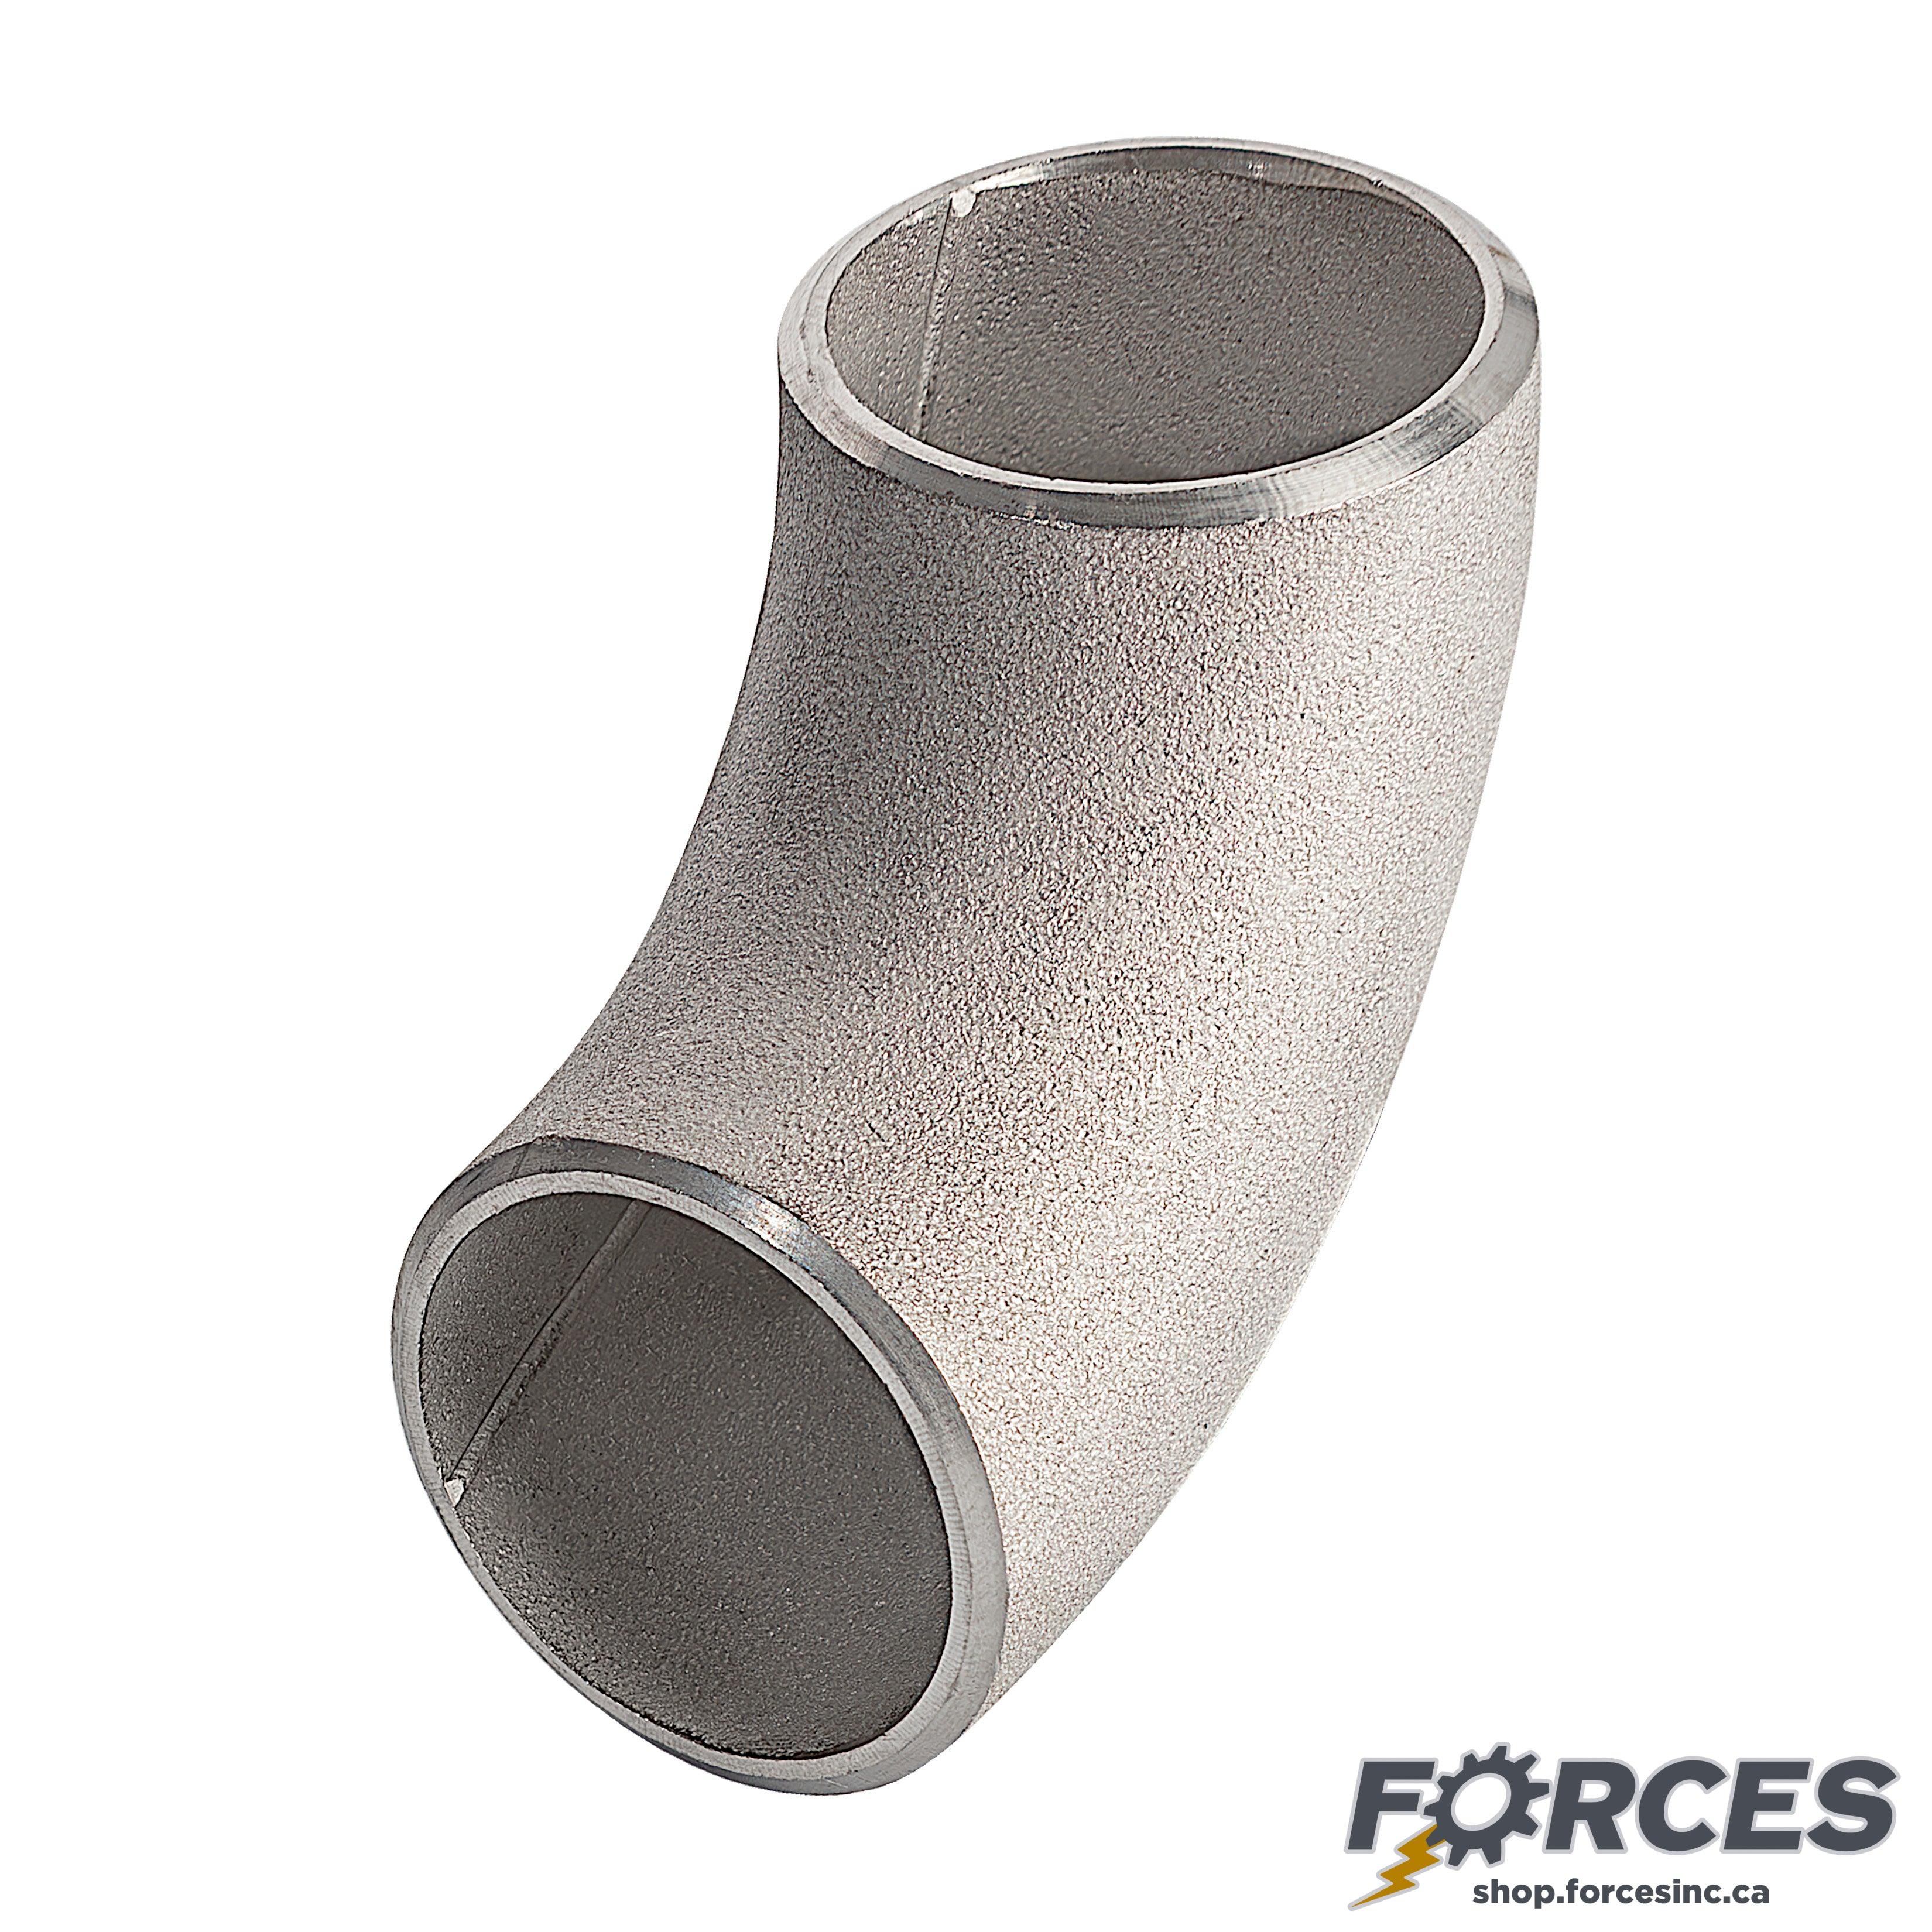 1/2" Elbow 90° SCH 10 Butt Weld - Stainless Steel 304 - Forces Inc